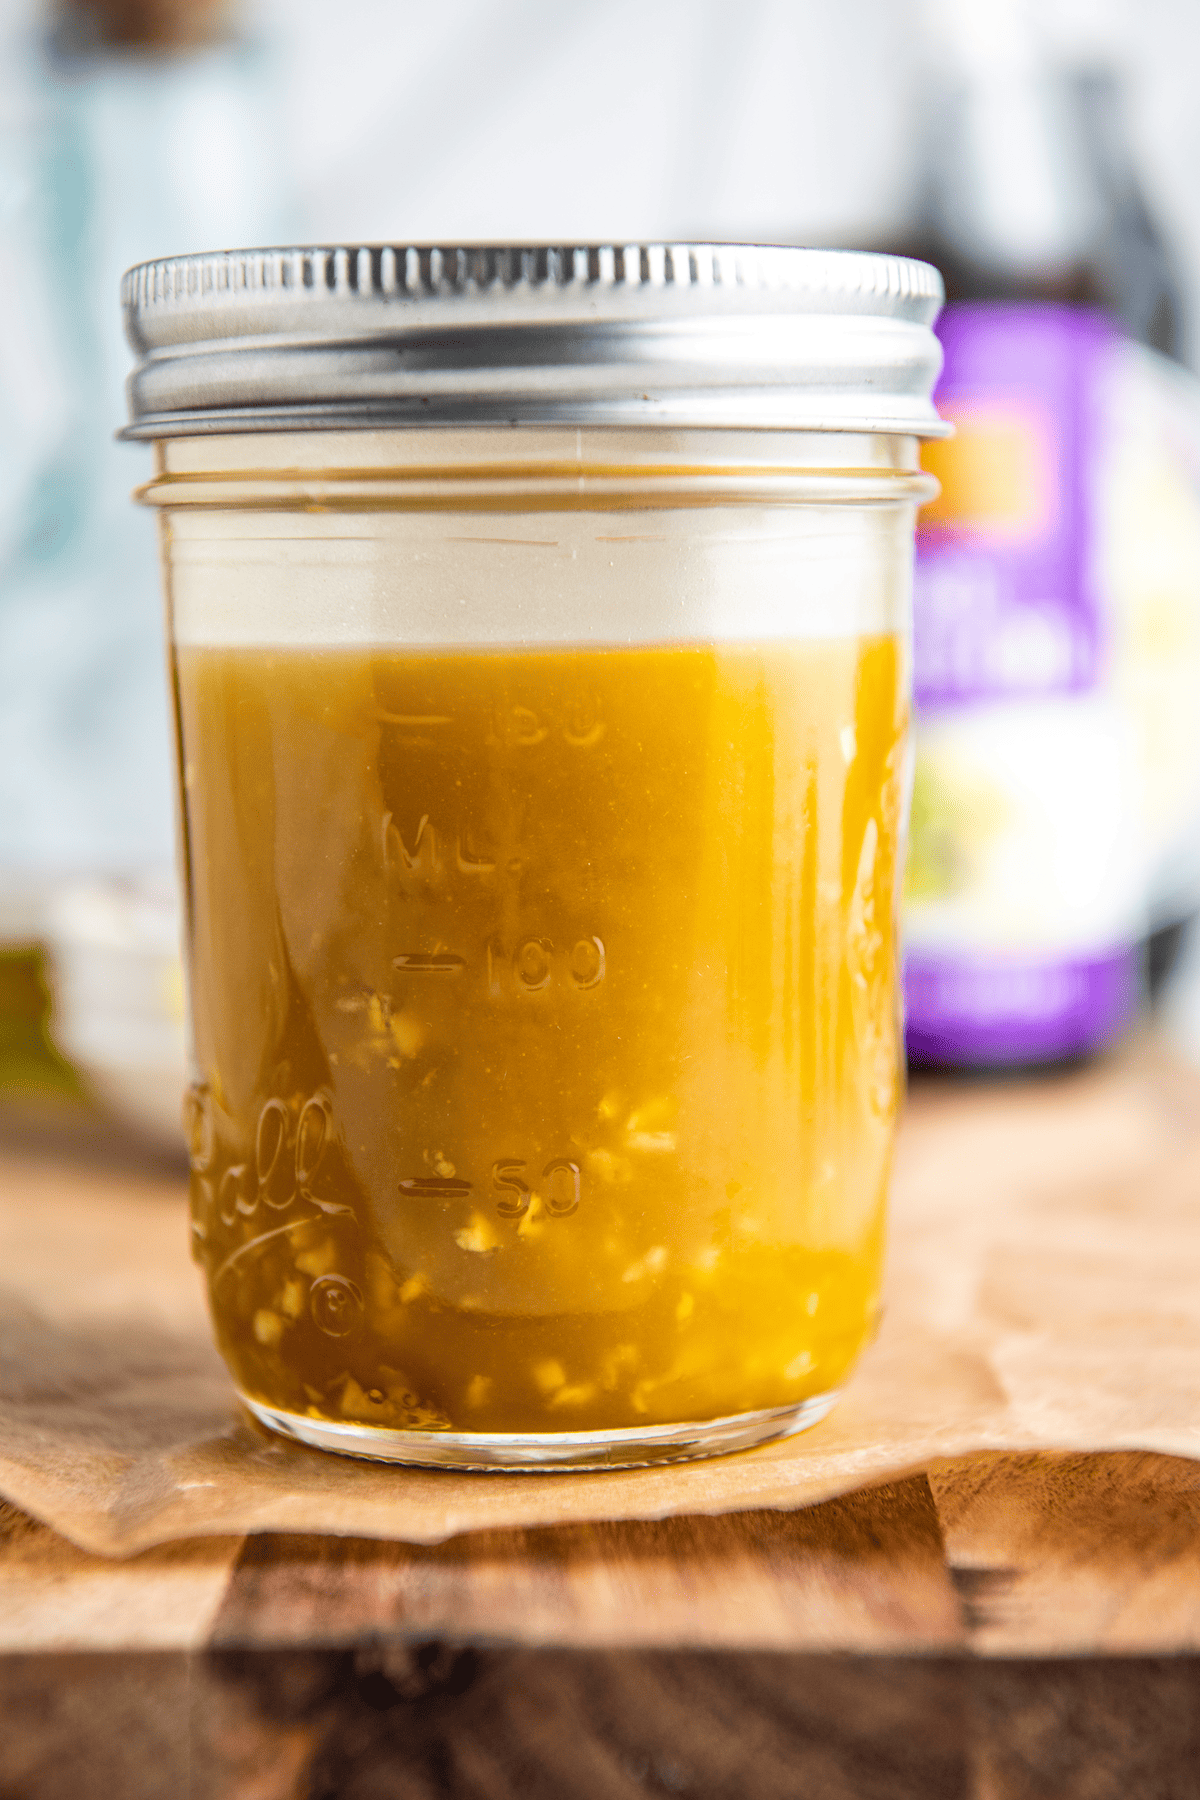 Asian salad dressing mixed in a glass jar.